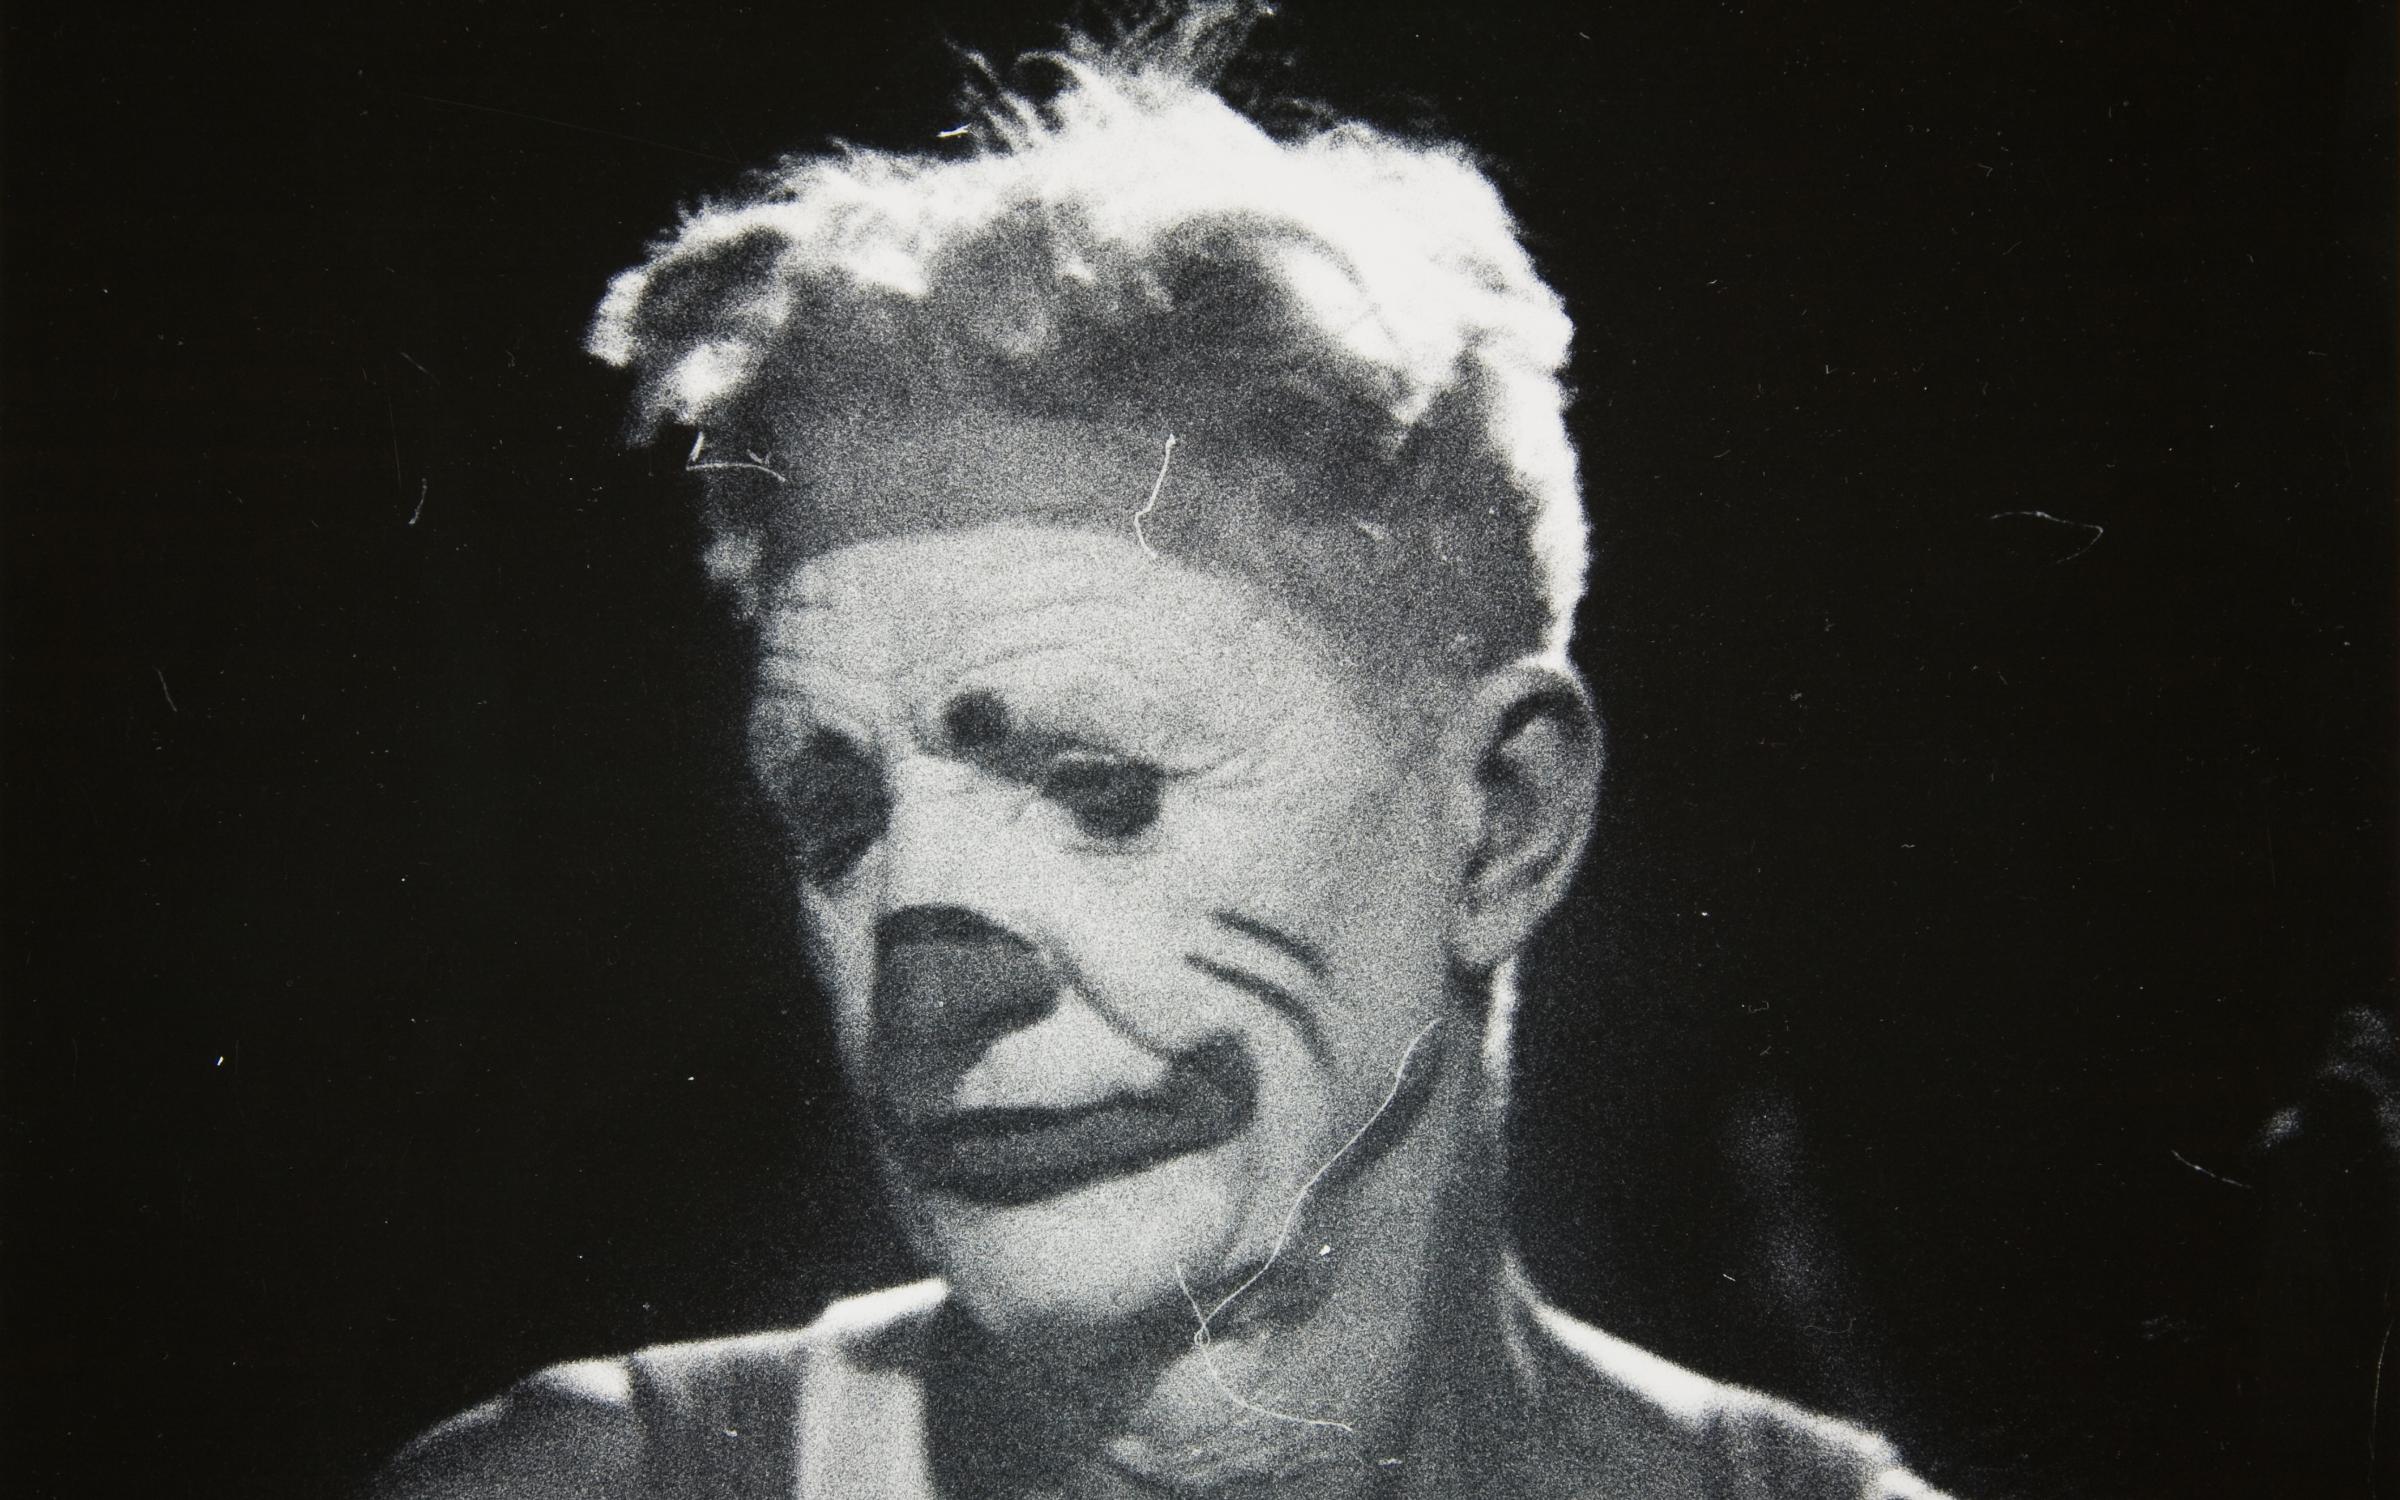 A black and white photo of figure in clown make up. The figure looks down and to the side as though sad.